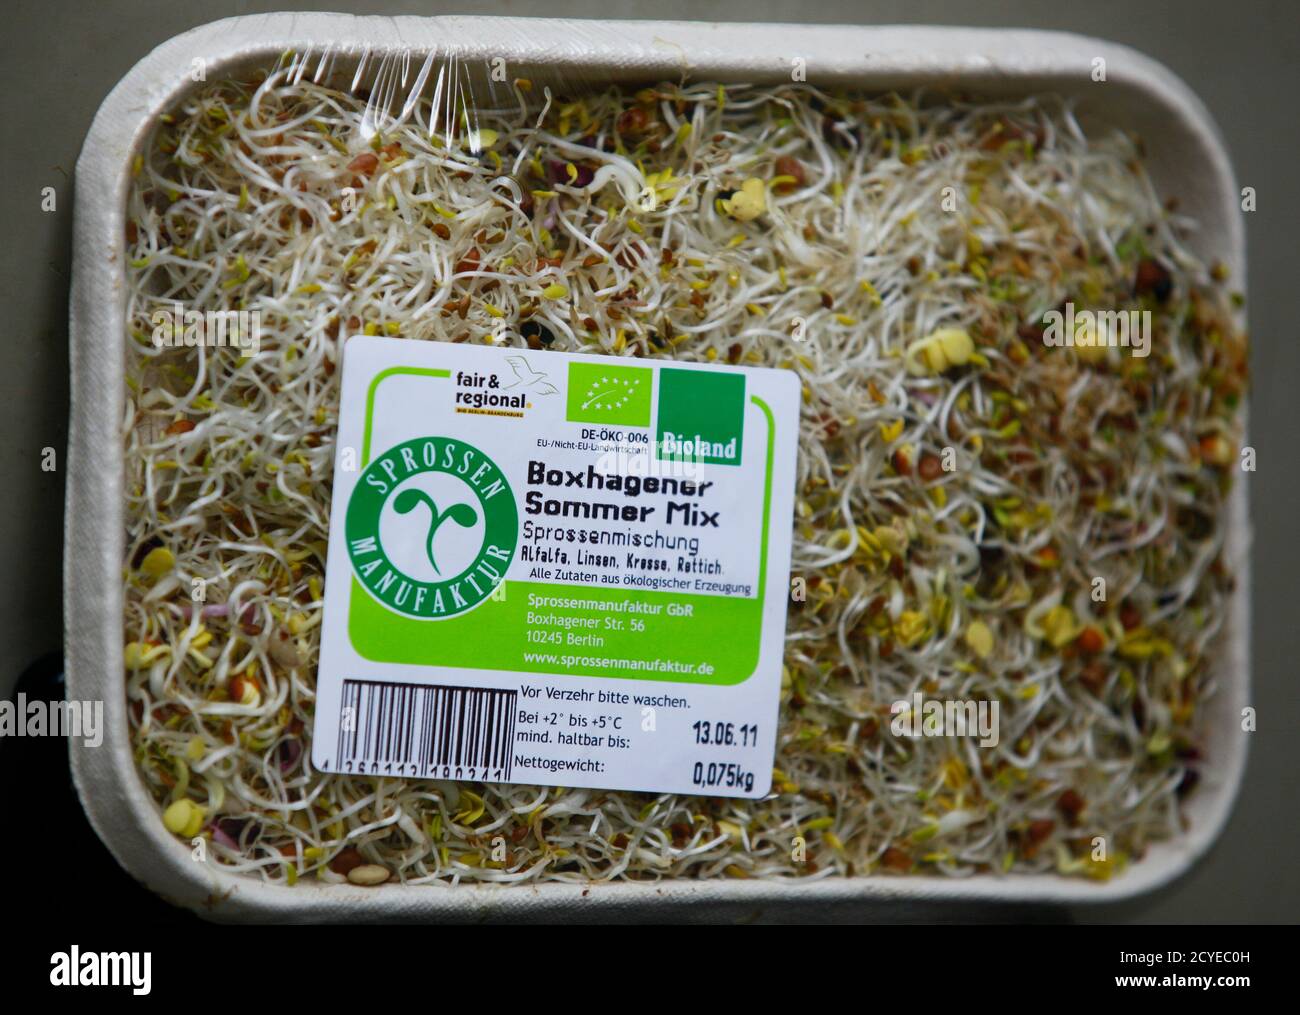 A mixture of ready-packed bean and salad sprouts are pictured at Berlin's sprouts manufacturer 'Sprossenmanufaktur' in Berlin June 6, 2011. The managing director of a German organic farm near Hanover that might be at the centre of a deadly E.coli outbreak said on Monday he was baffled that his beansprouts are suspected of causing such devastation. German officials said on Sunday the beansprouts of Klaus Verbeck, the head of the 'Gaertnerhof Bienenbuettel', could be the source of the EHEC bacteria (enterohaemorrhagic Escherichia coli) outbreak that has killed 22 and made more than 2,200 people  Stock Photo